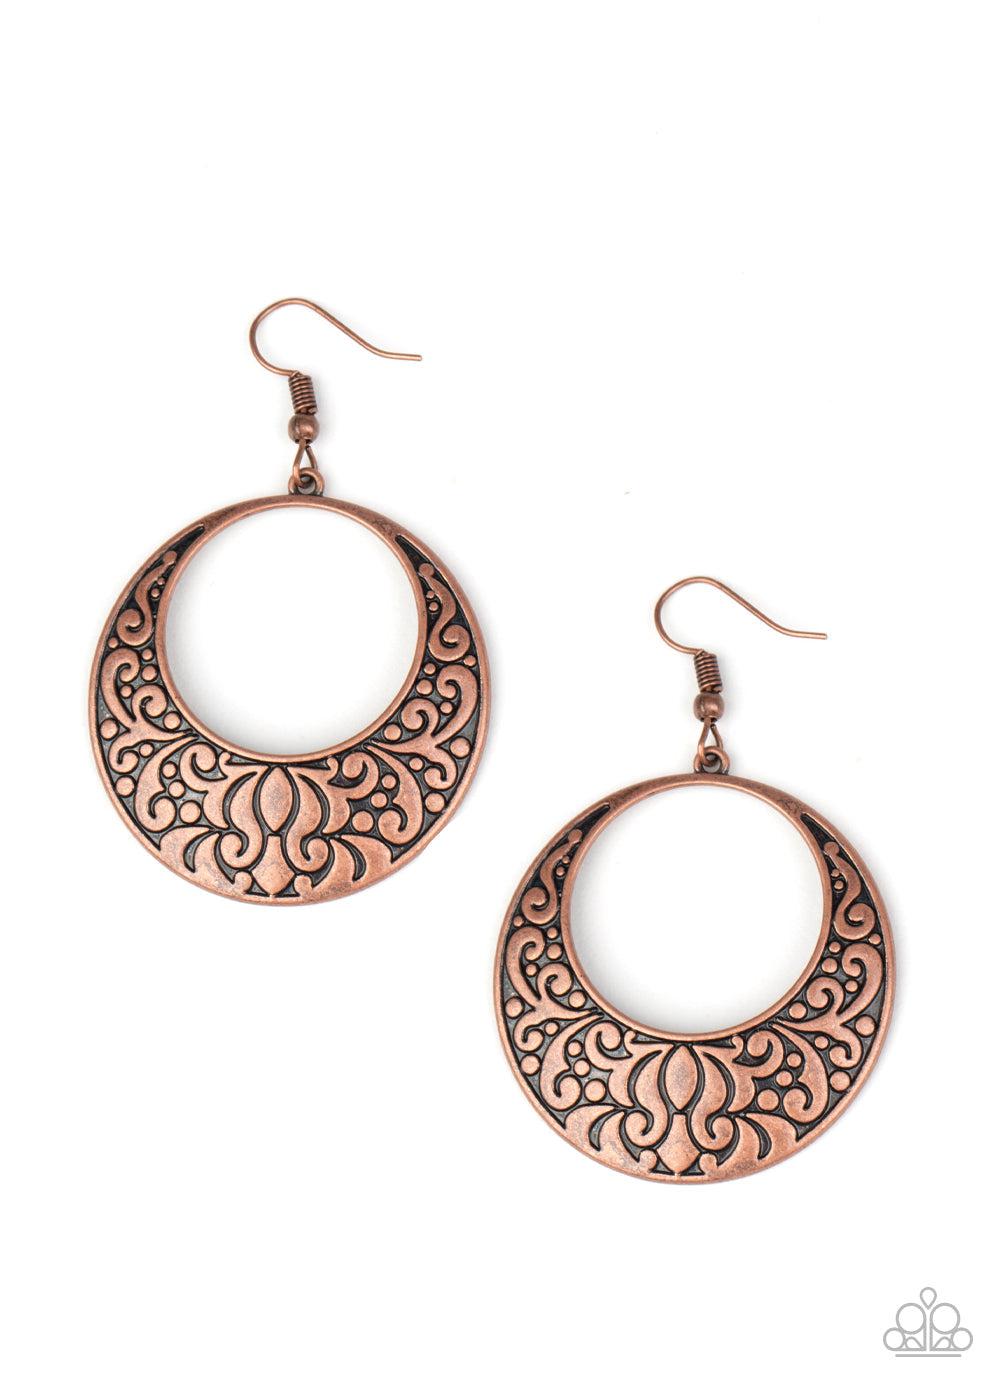 Secret Groves Copper Earrings - Paparazzi Accessories- lightbox - CarasShop.com - $5 Jewelry by Cara Jewels